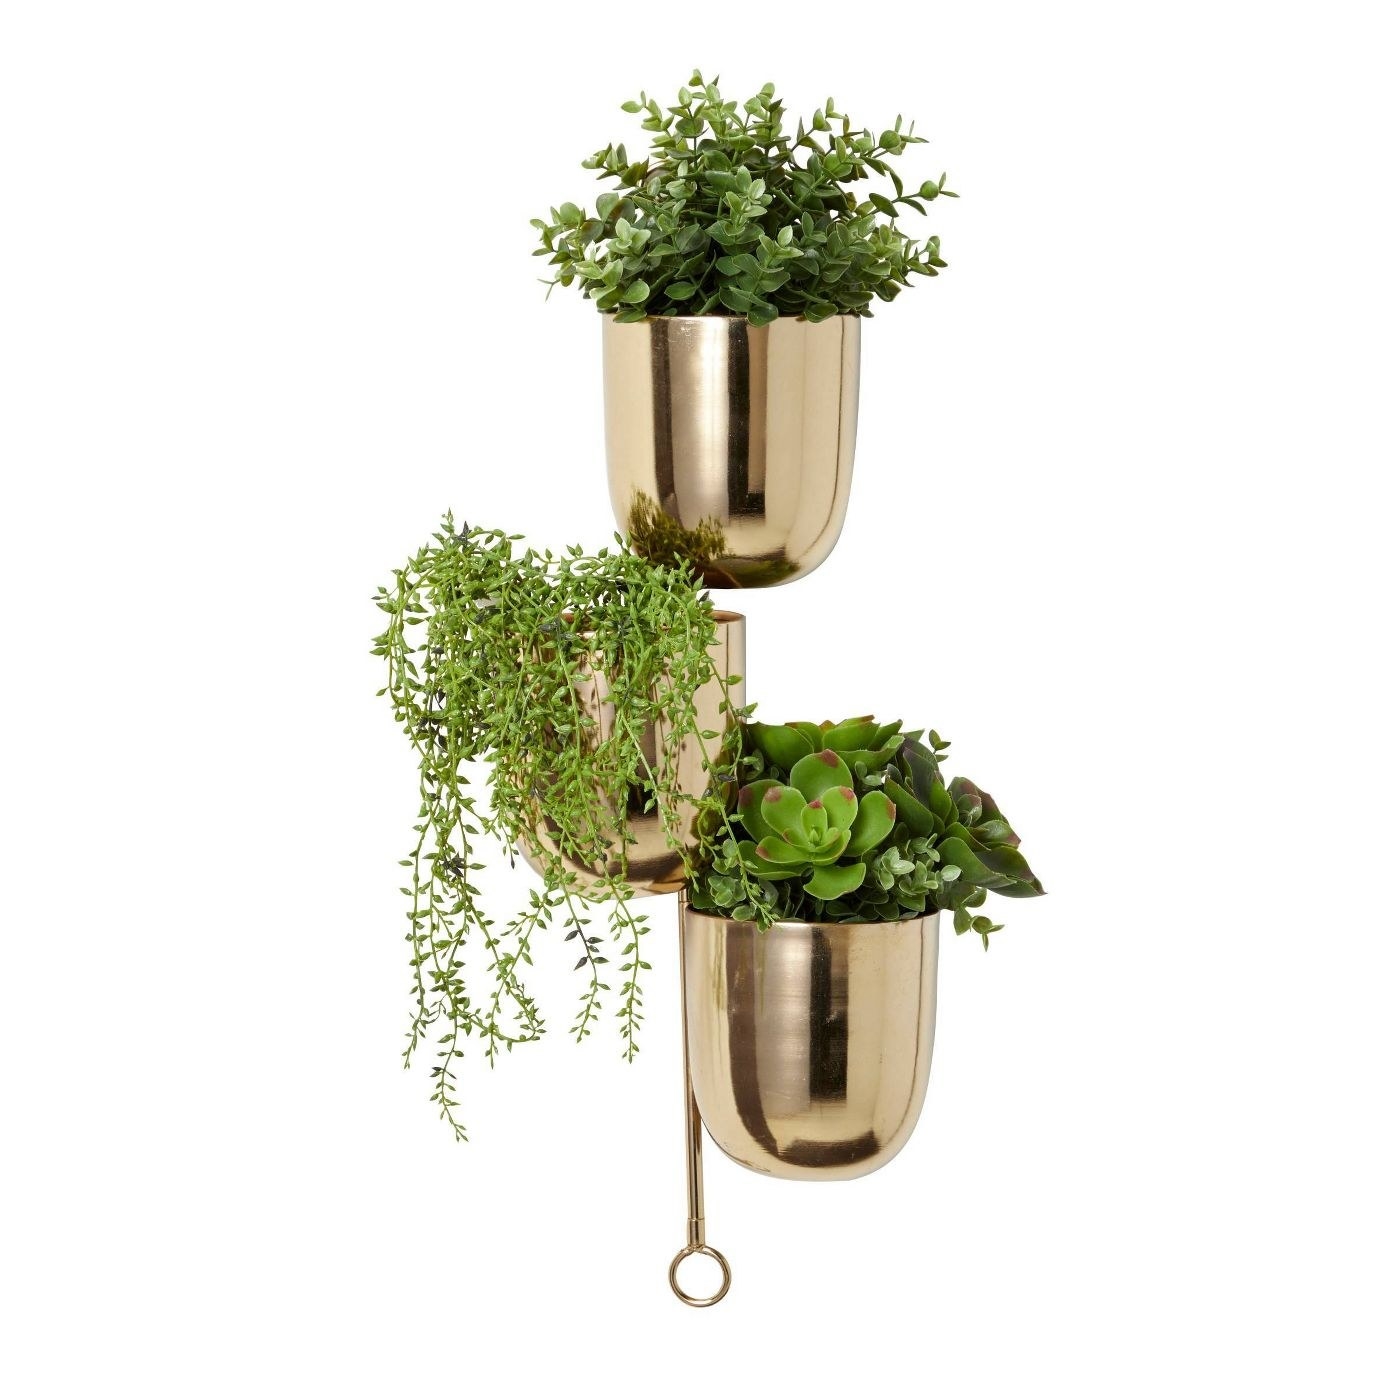 The gold plater with three plastic plants